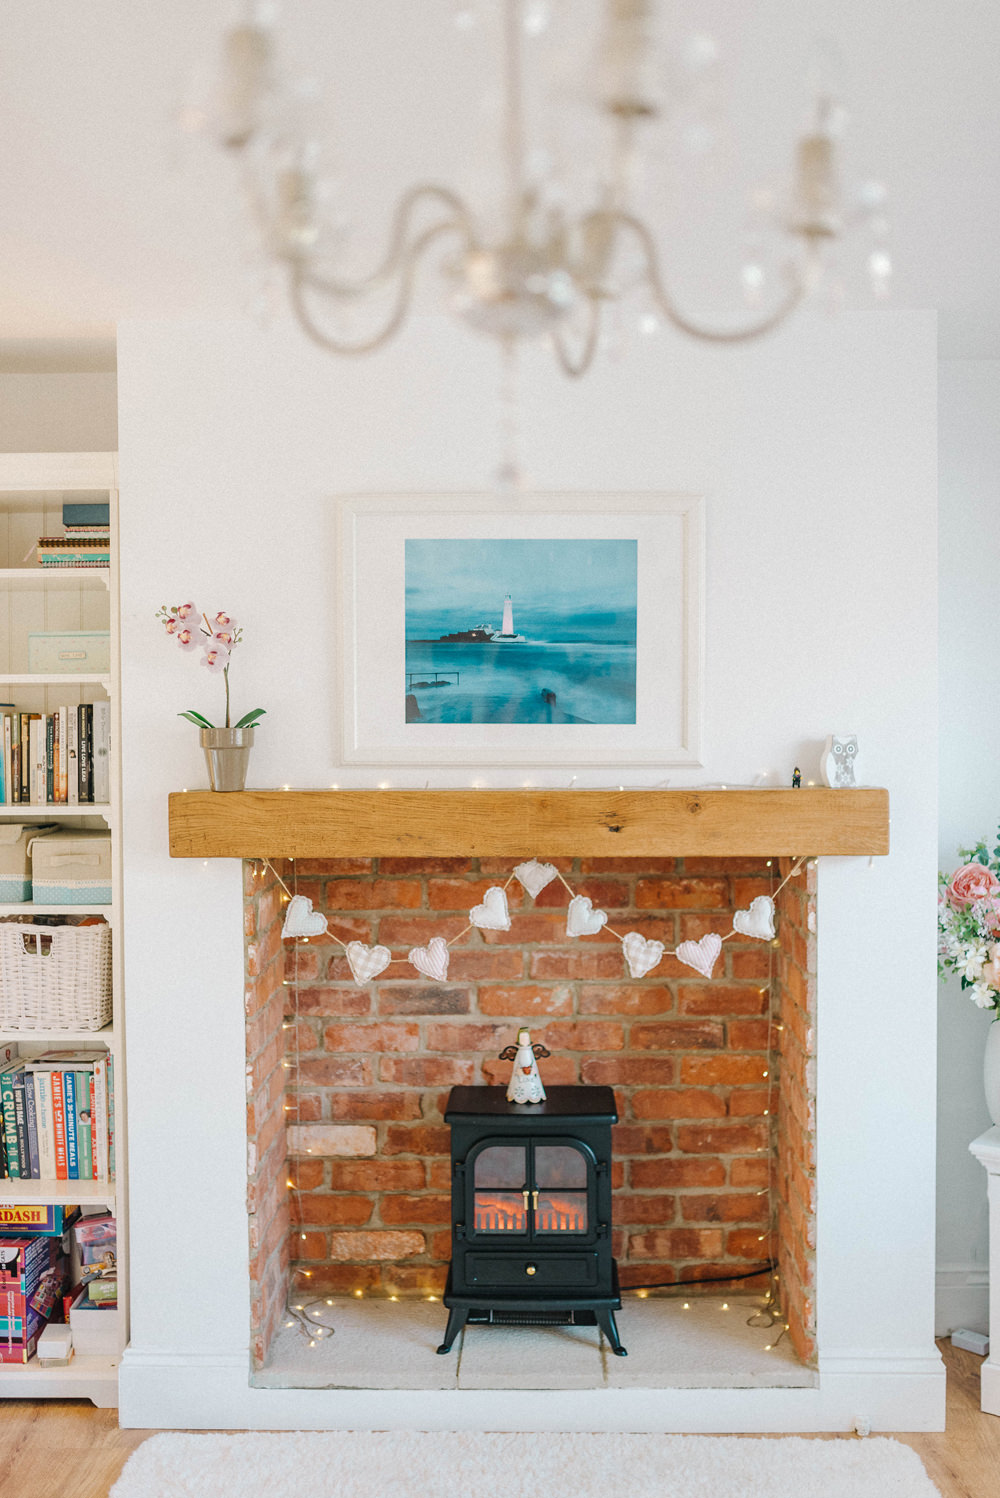 Feature fireplace with stove and bunting